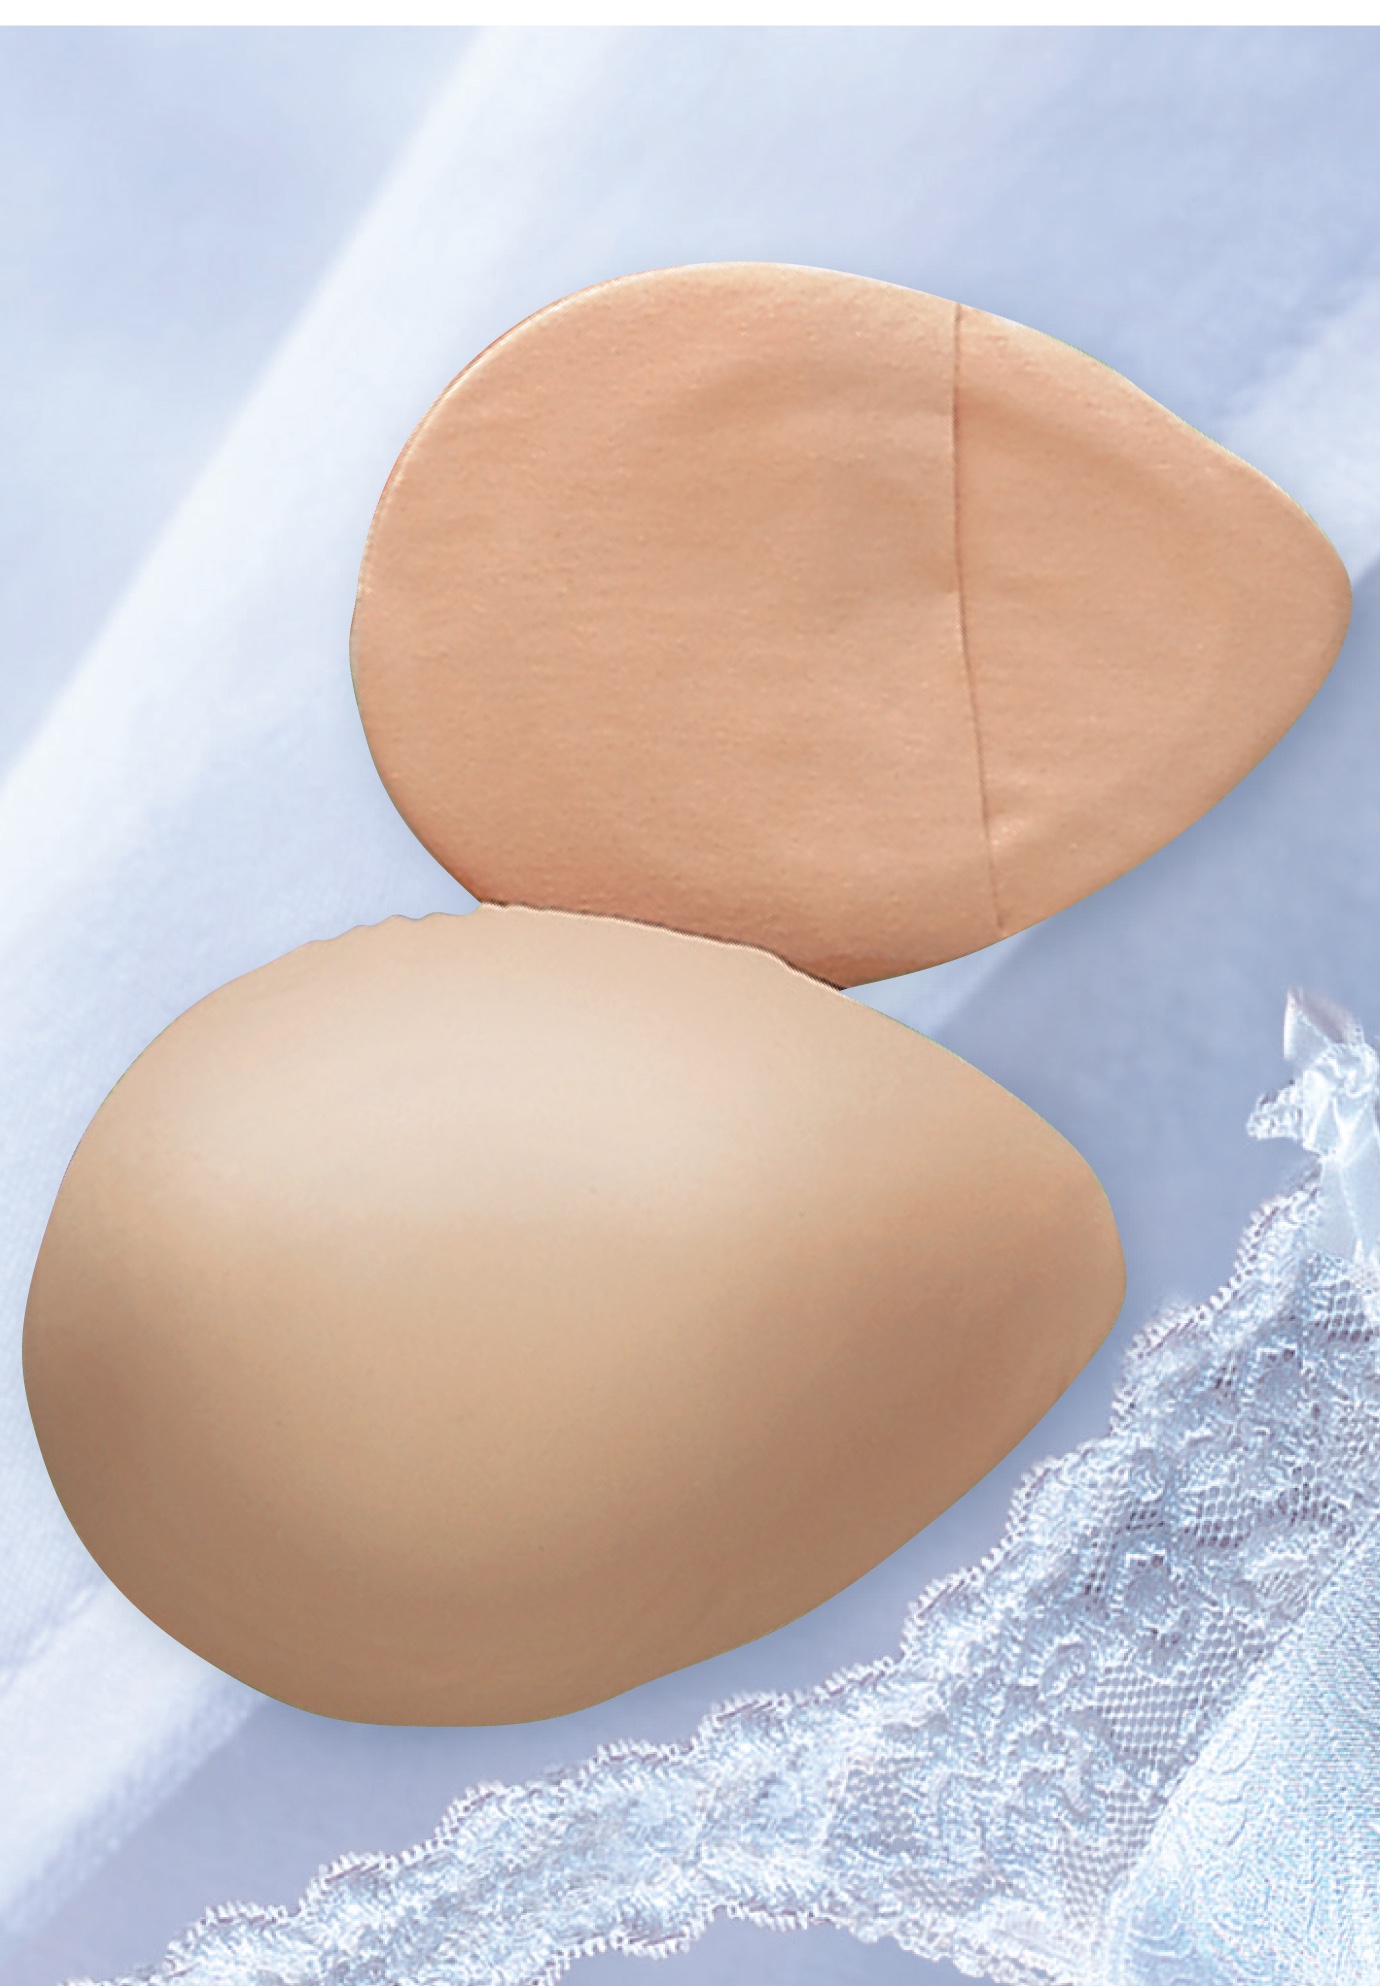 How To Make Silicone Breast Forms At Home